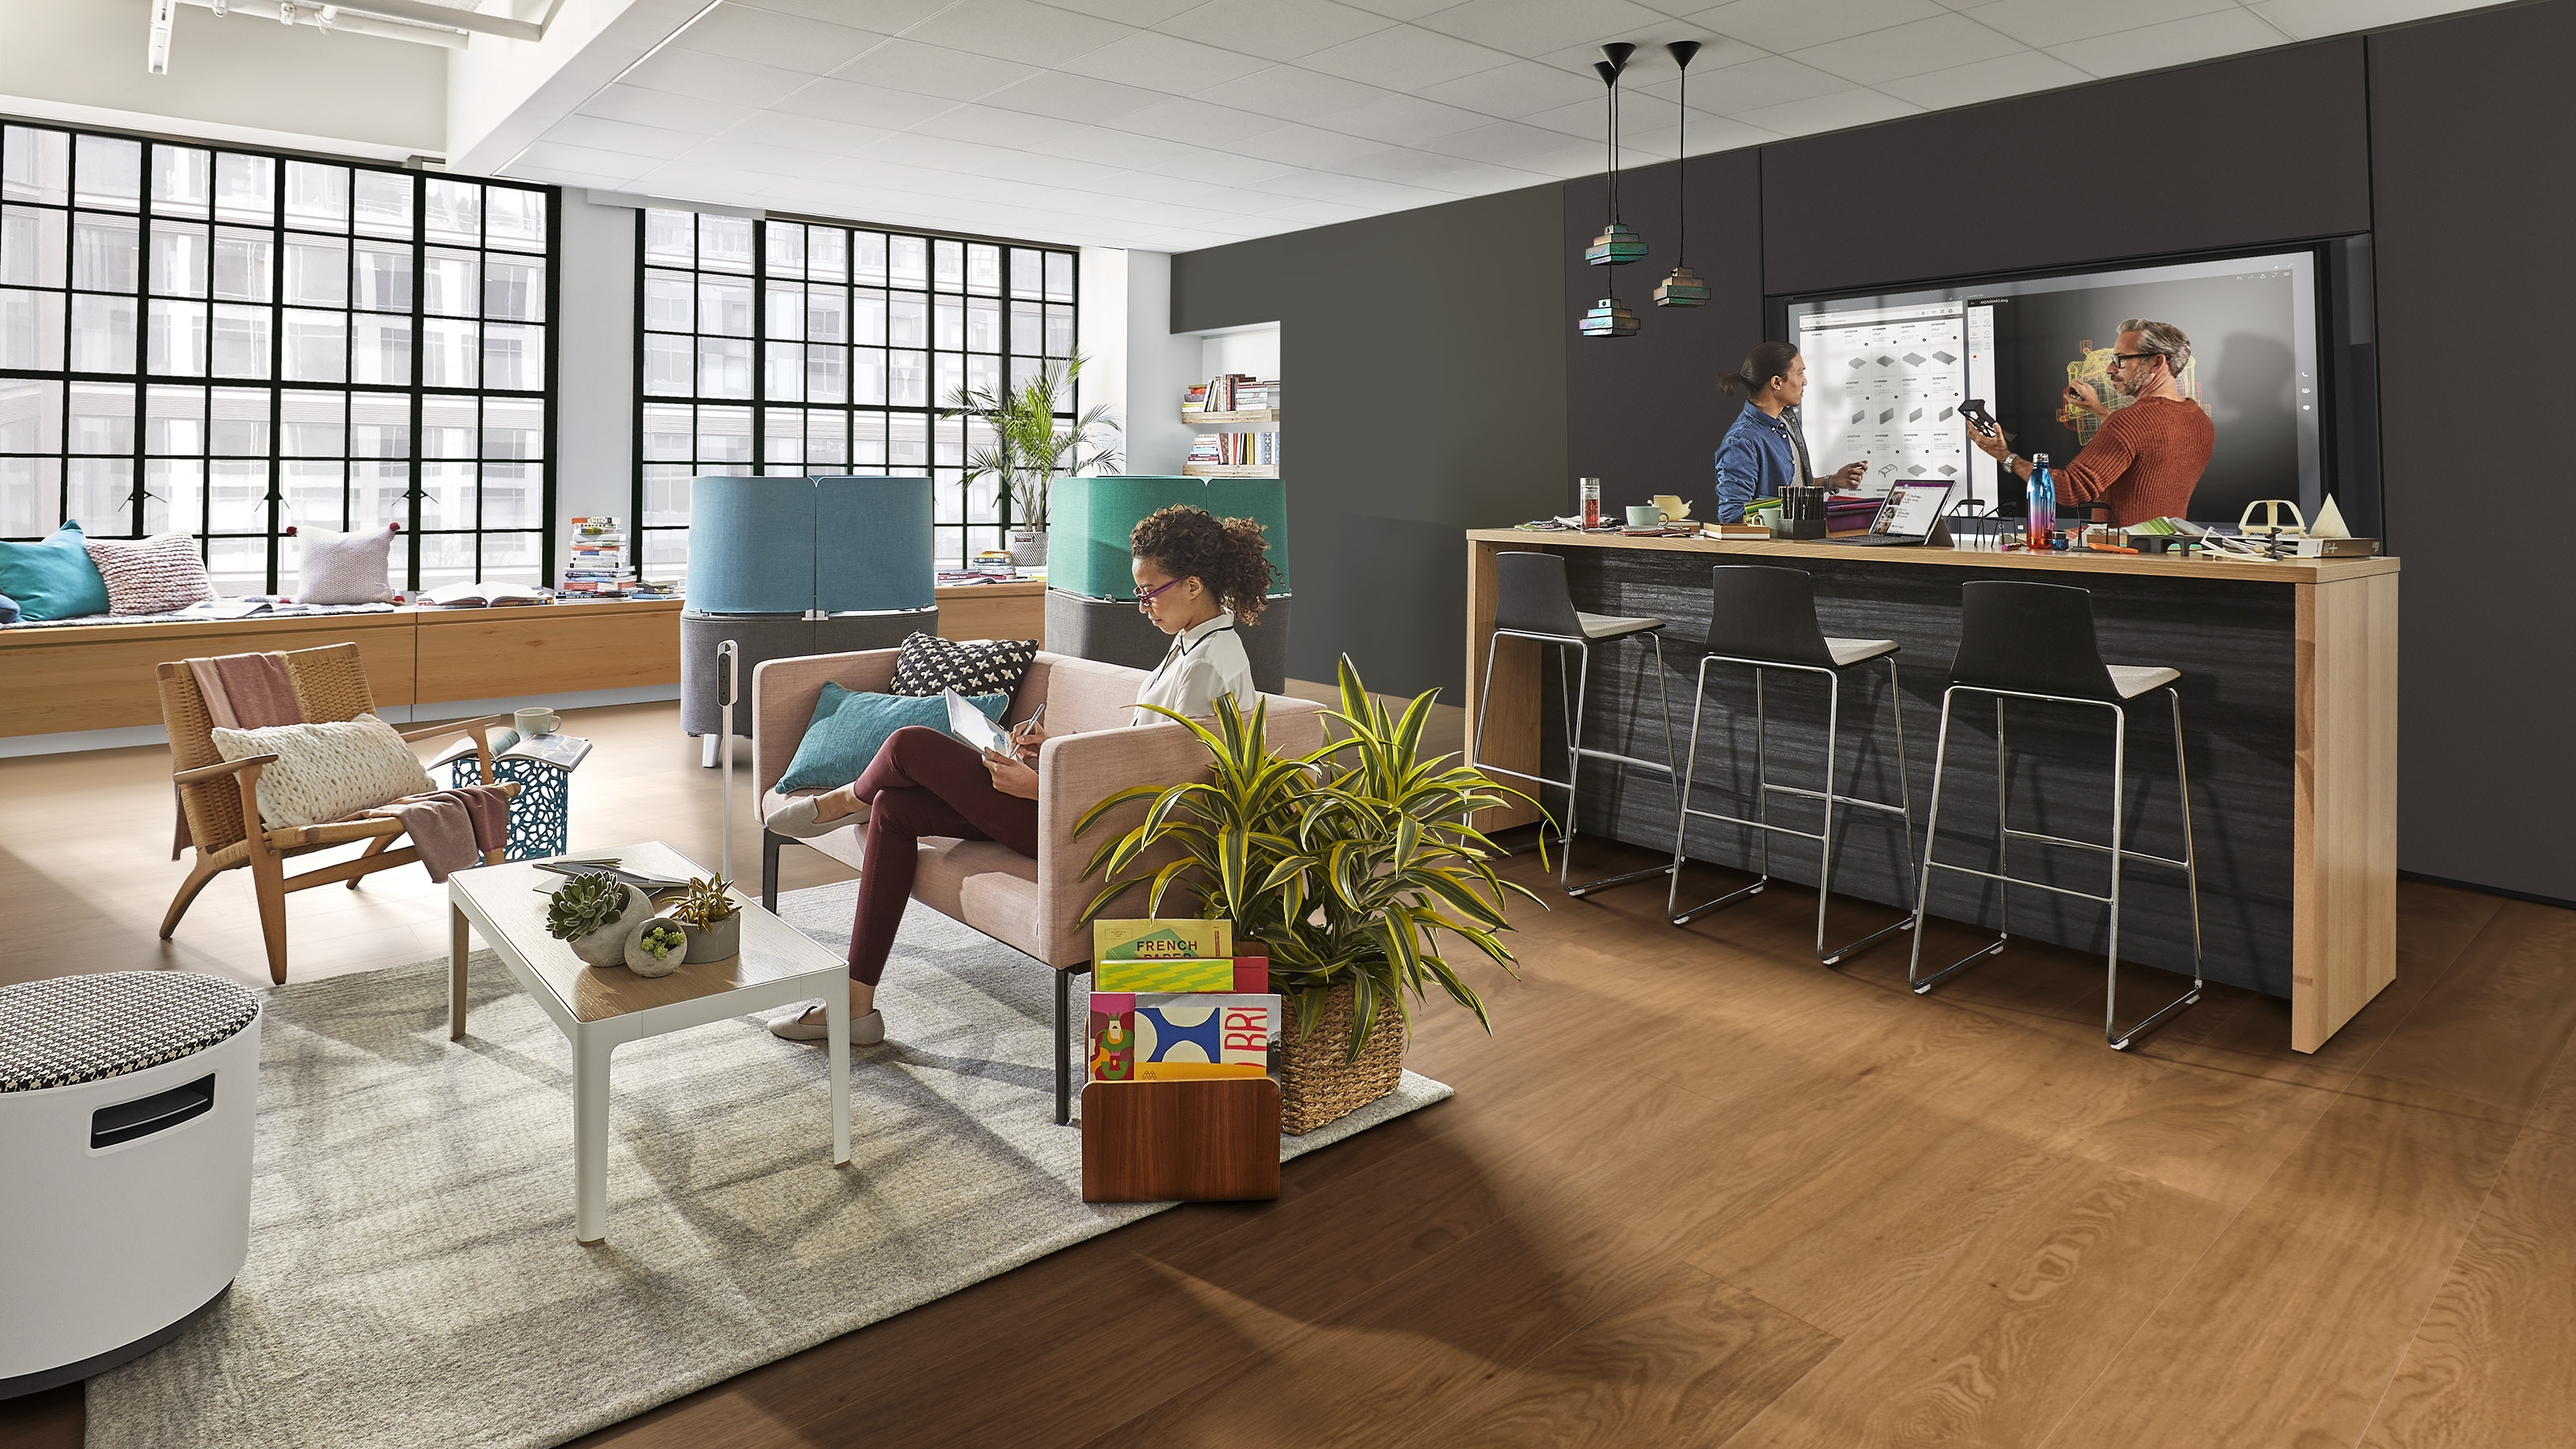 Creative Spaces by Steelcase